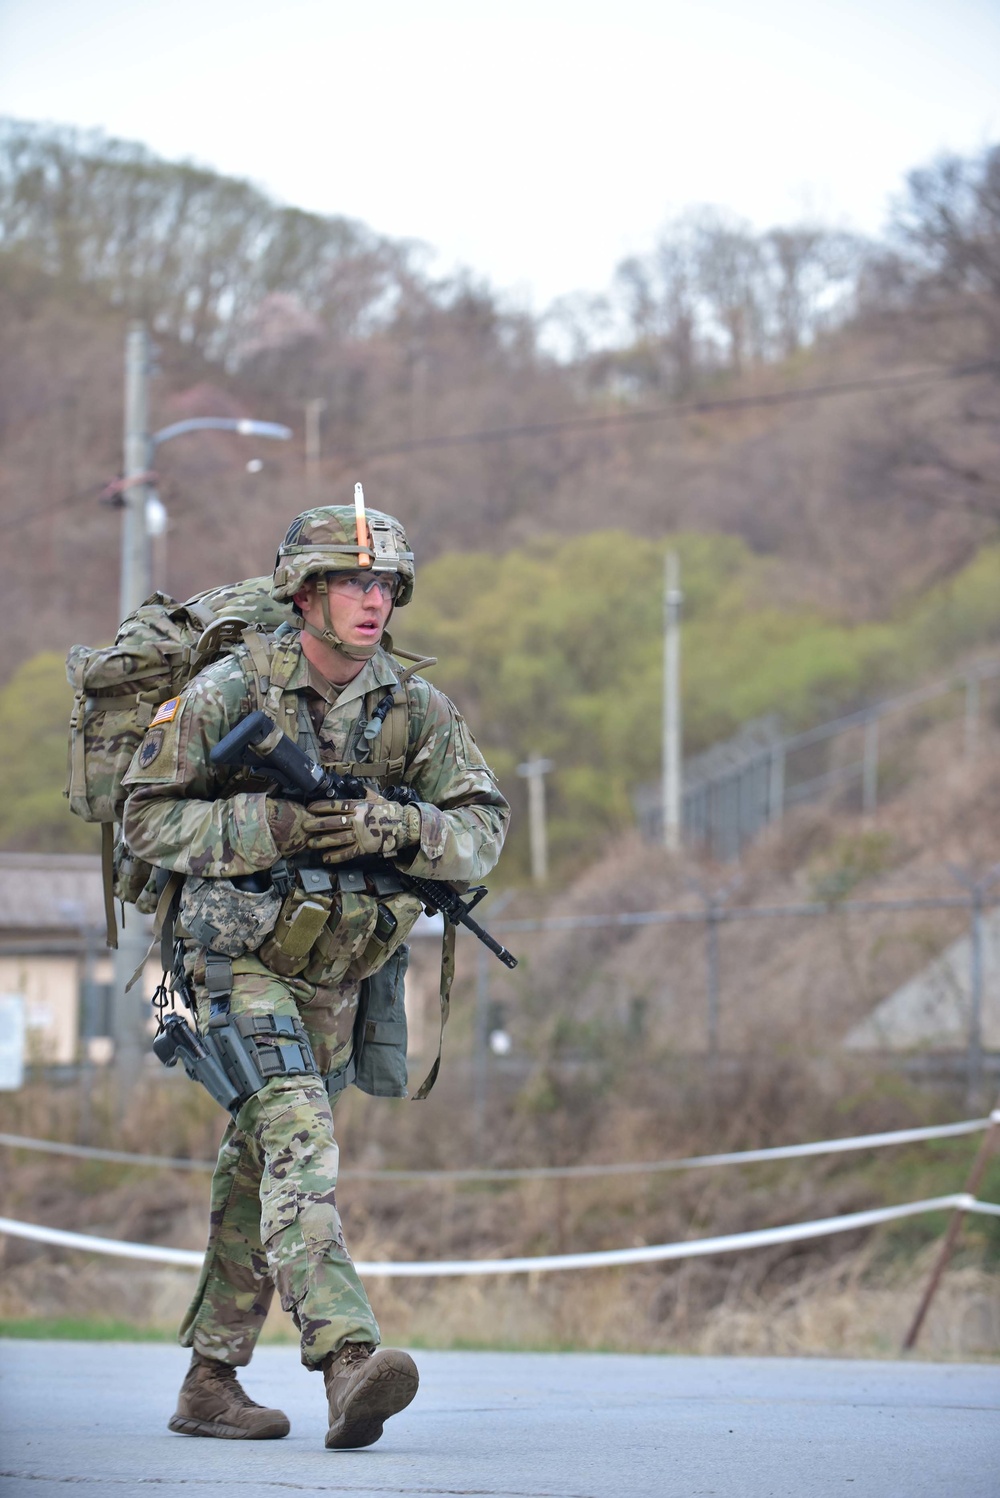 2nd Infantry Division/ROK-U.S. Combined Division 2018 Best Warrior Competition Command Shown: 2nd Infantry Division/ROK-U.S. Combined Division